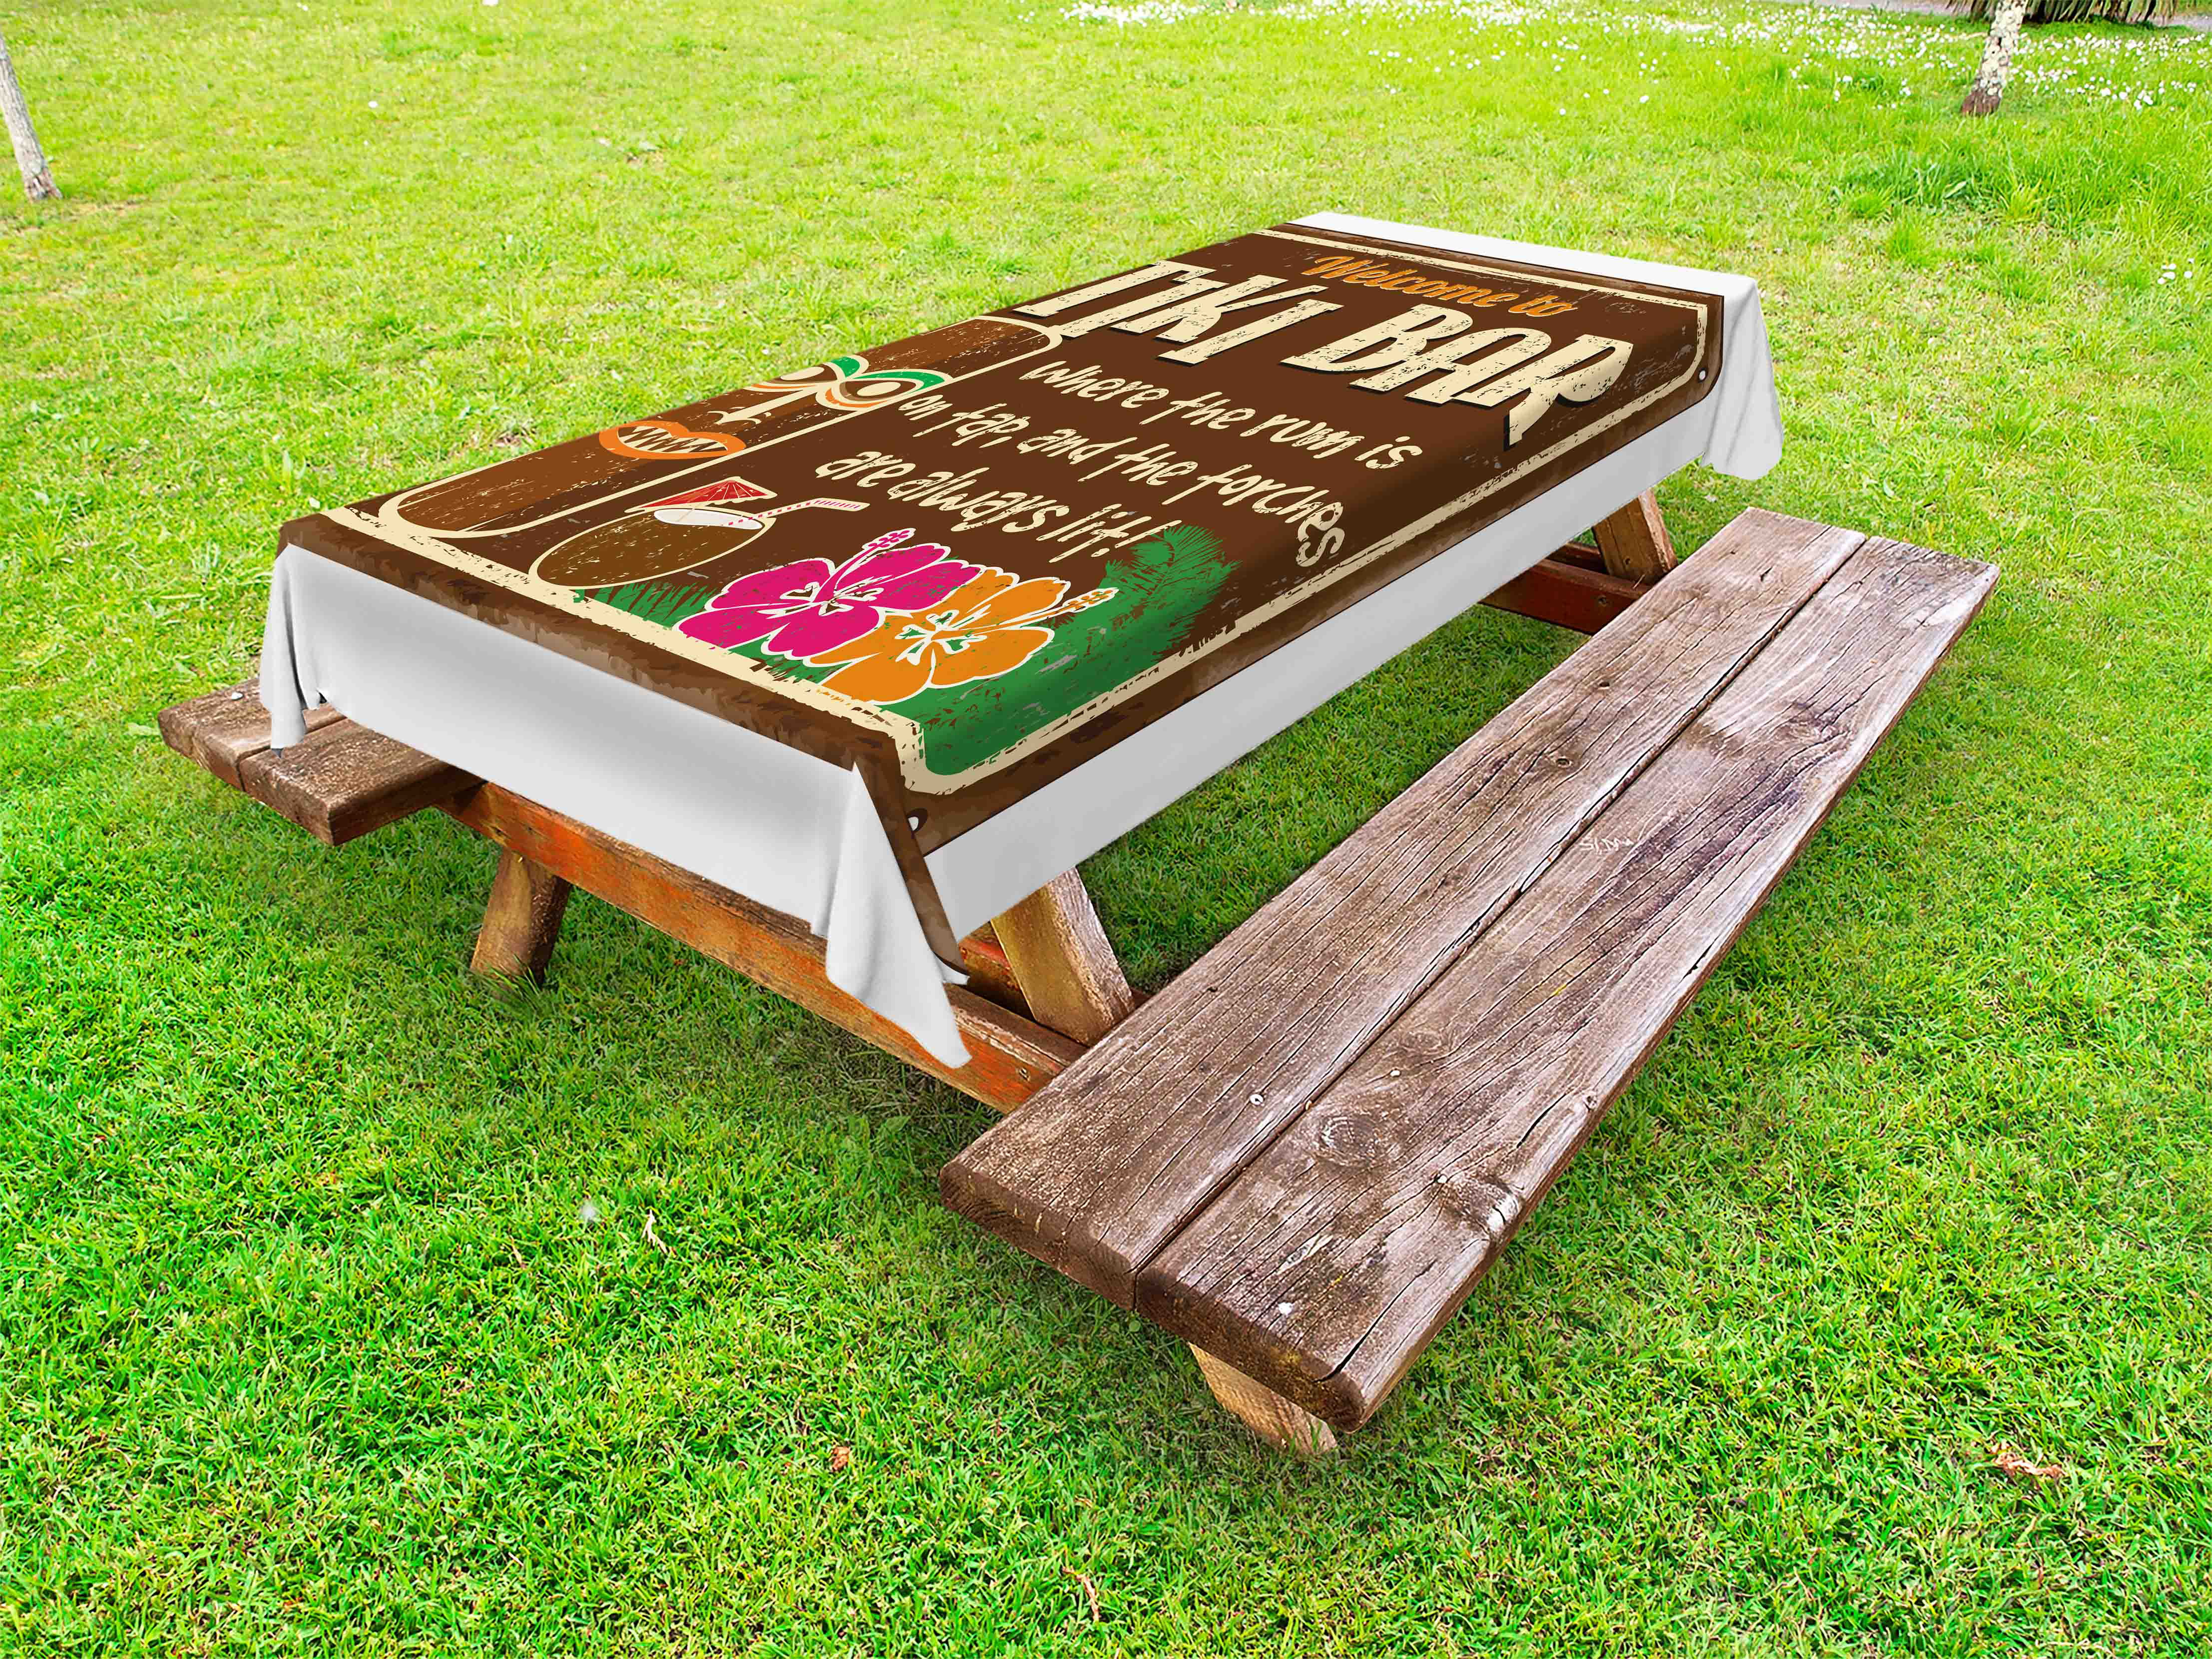 Details about   Ride Quote Outdoor Picnic Tablecloth in 3 Sizes Washable Waterproof